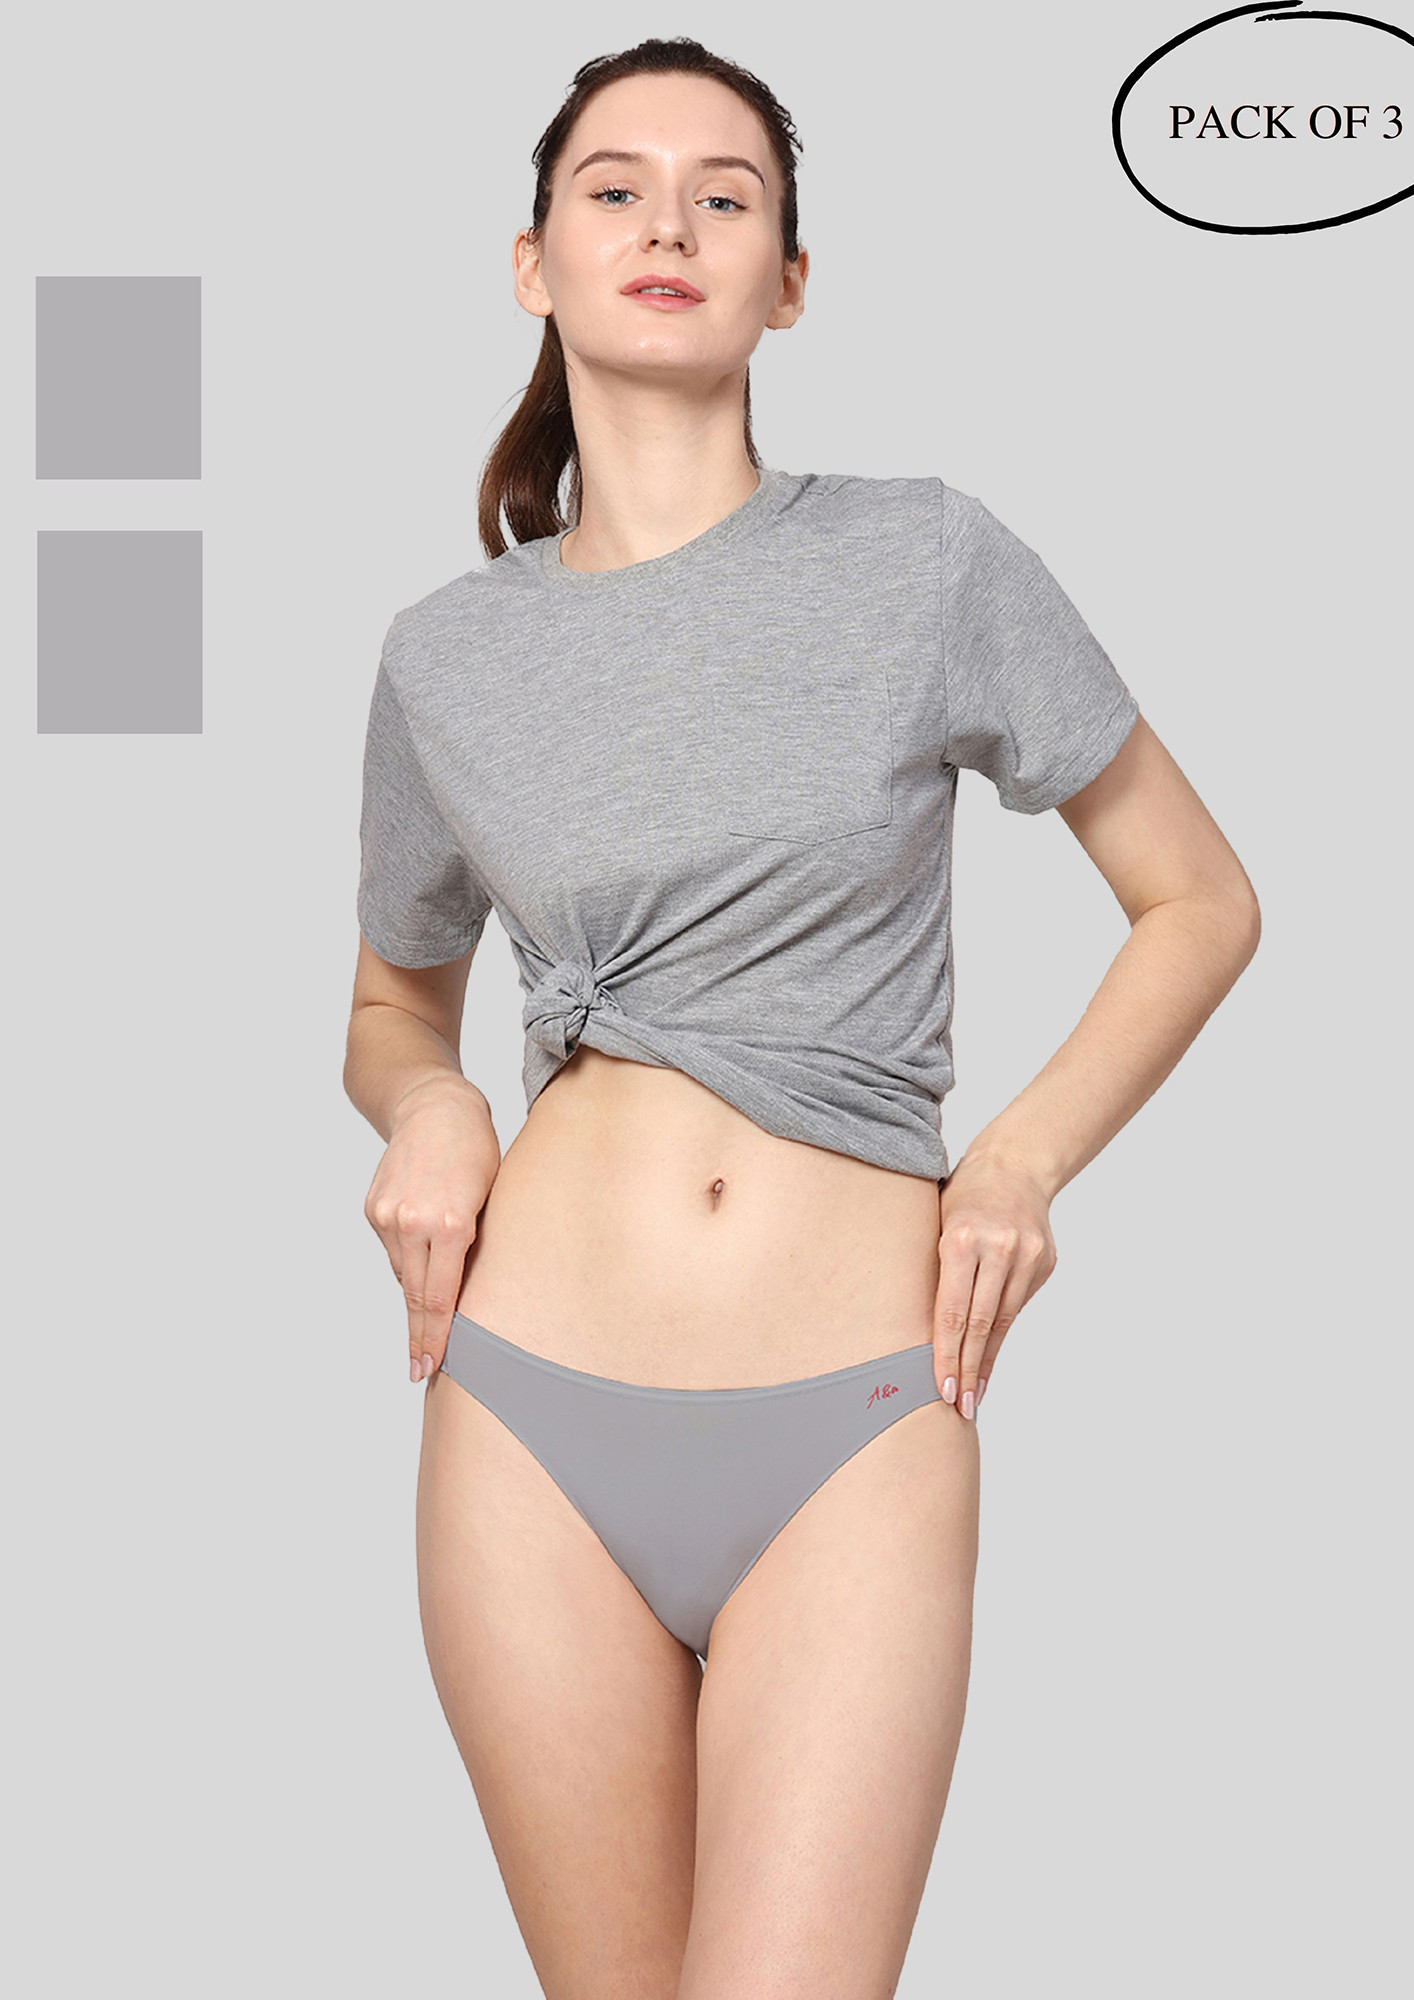 Buy AshleyandAlvis Anti Bacterial, Bamboo MicroModal, Premium Panty, Women  BIKINI brief, No Itching, 2X Moisture Wicking Daily use Underwear, Odour  Free, (Color-GREY-GREY-GREY) (PACK OF 3) for Women Online in India